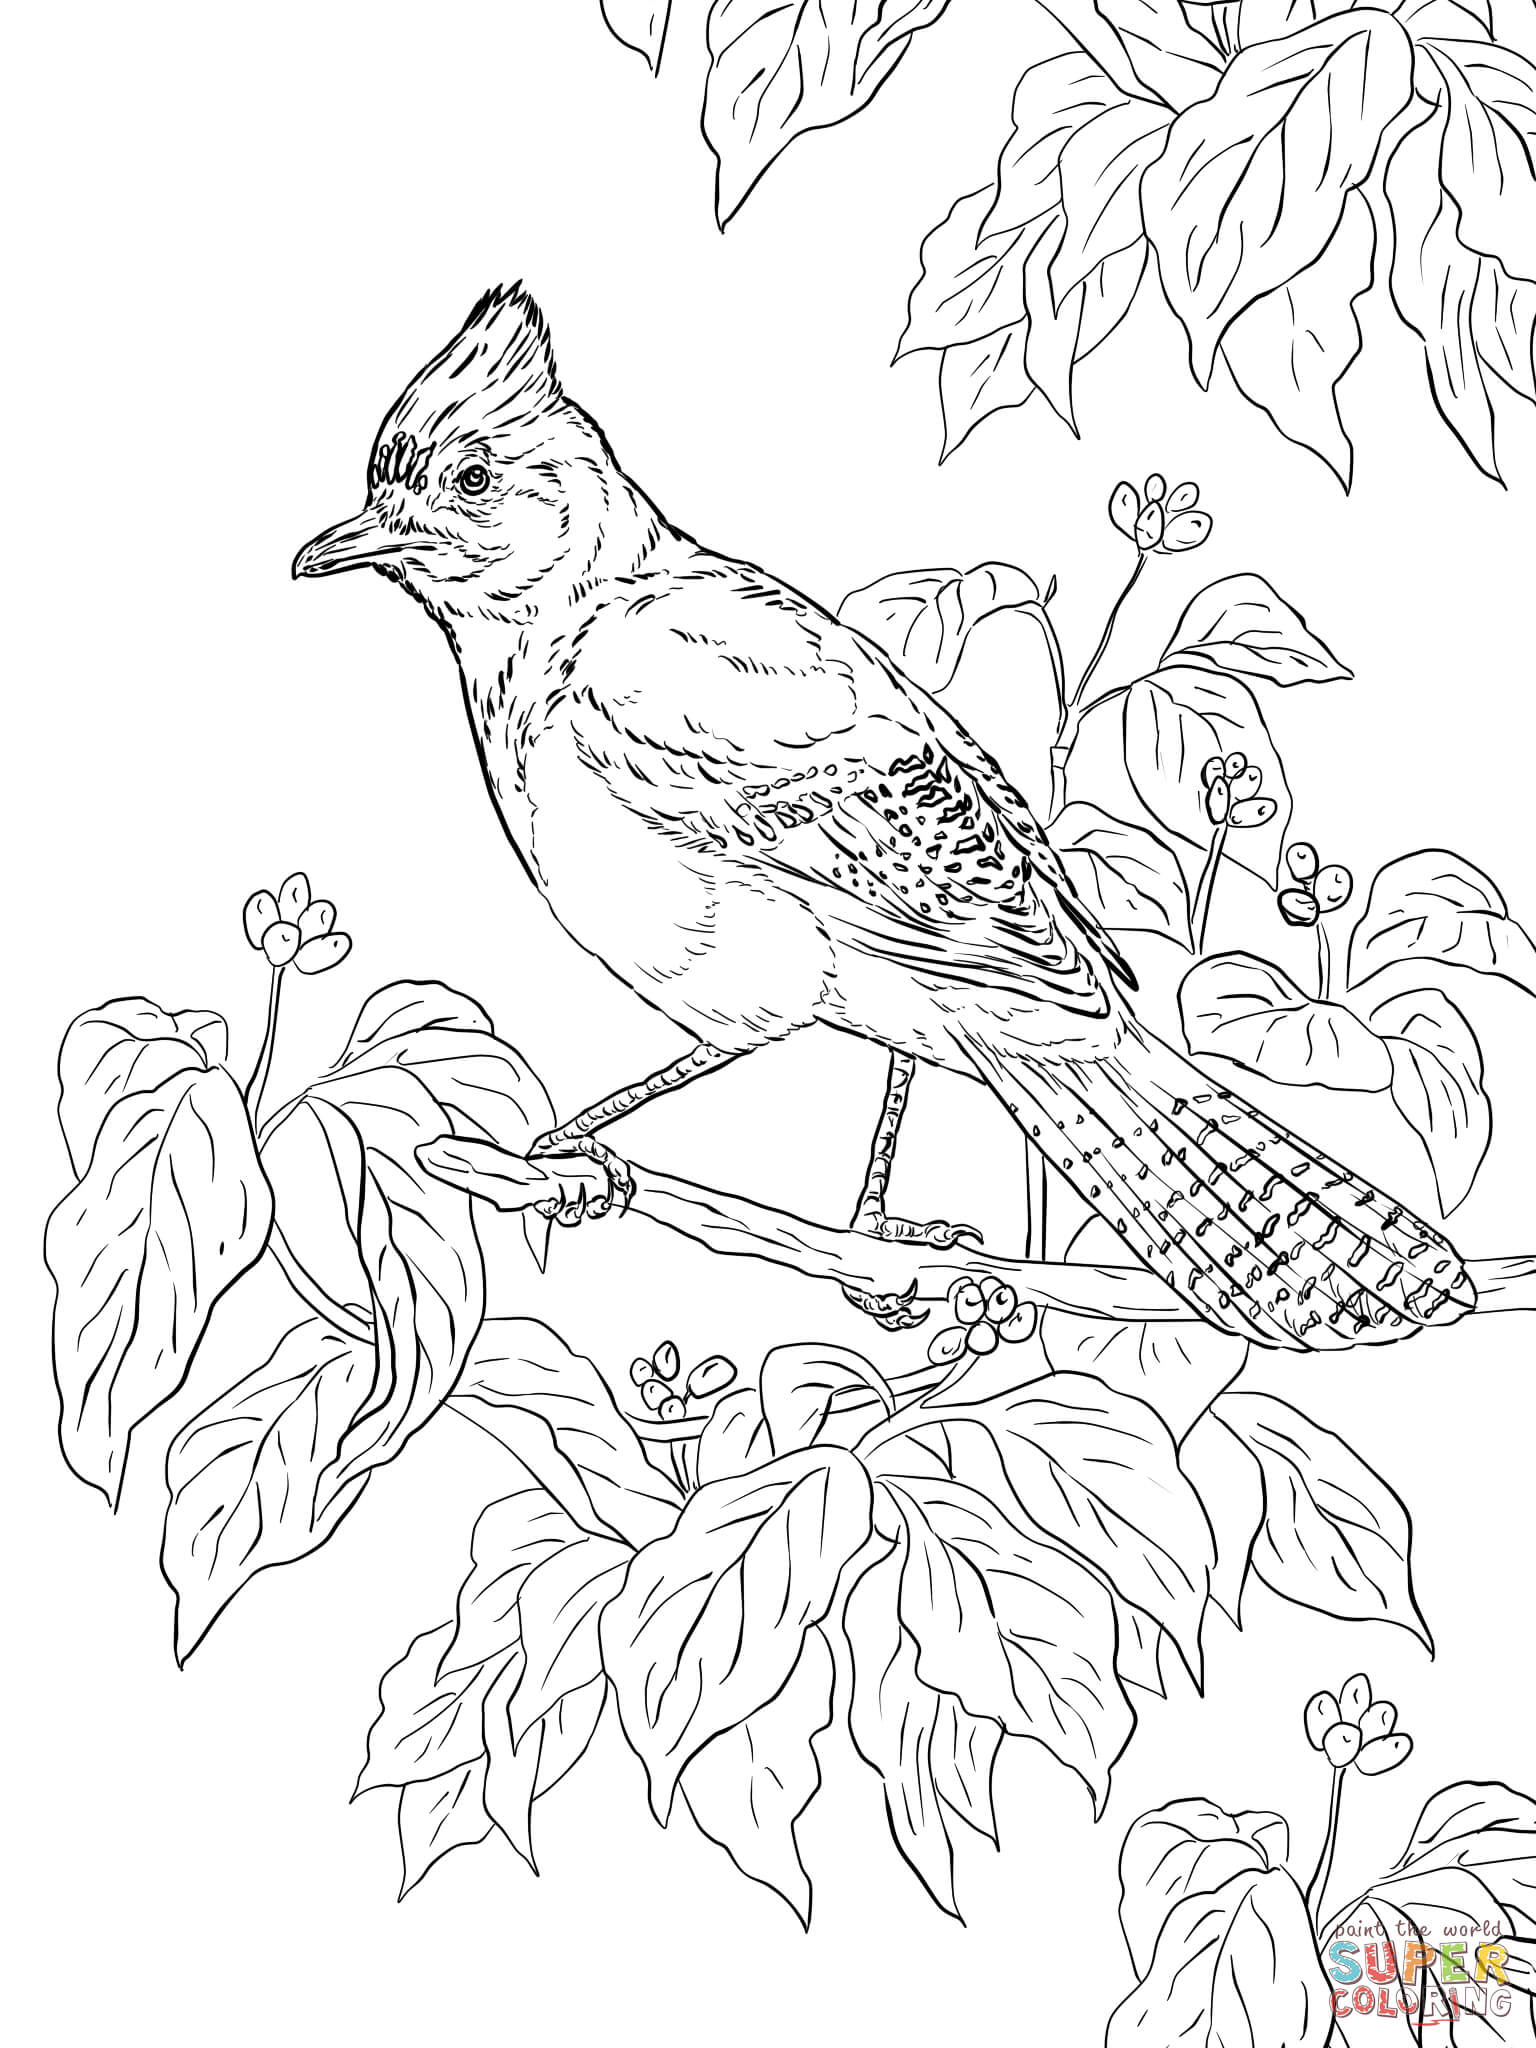 Realistic Steller's Jay coloring page | Free Printable Coloring Pages